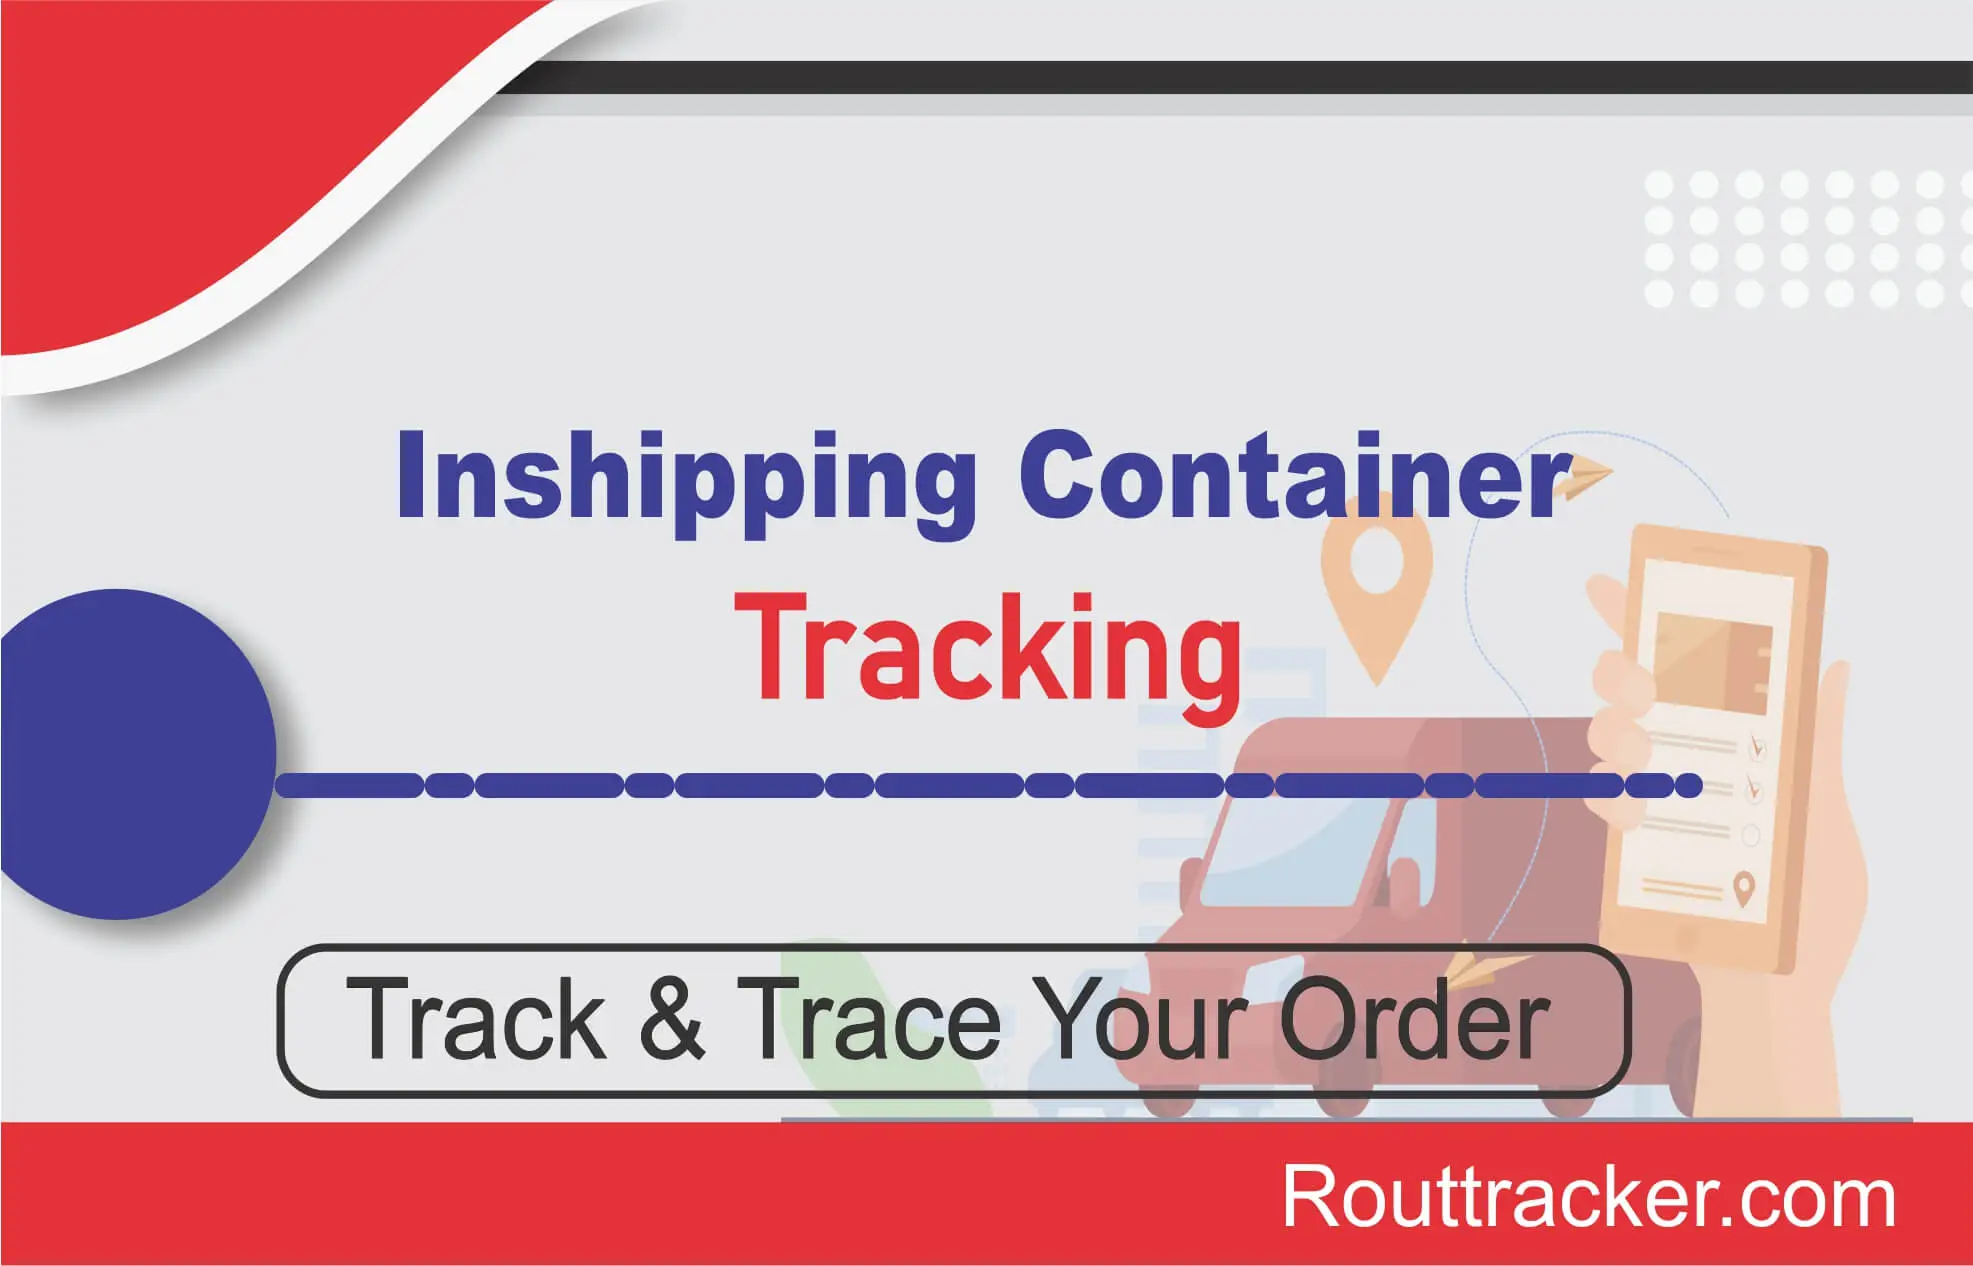 Inshipping Container Tracking